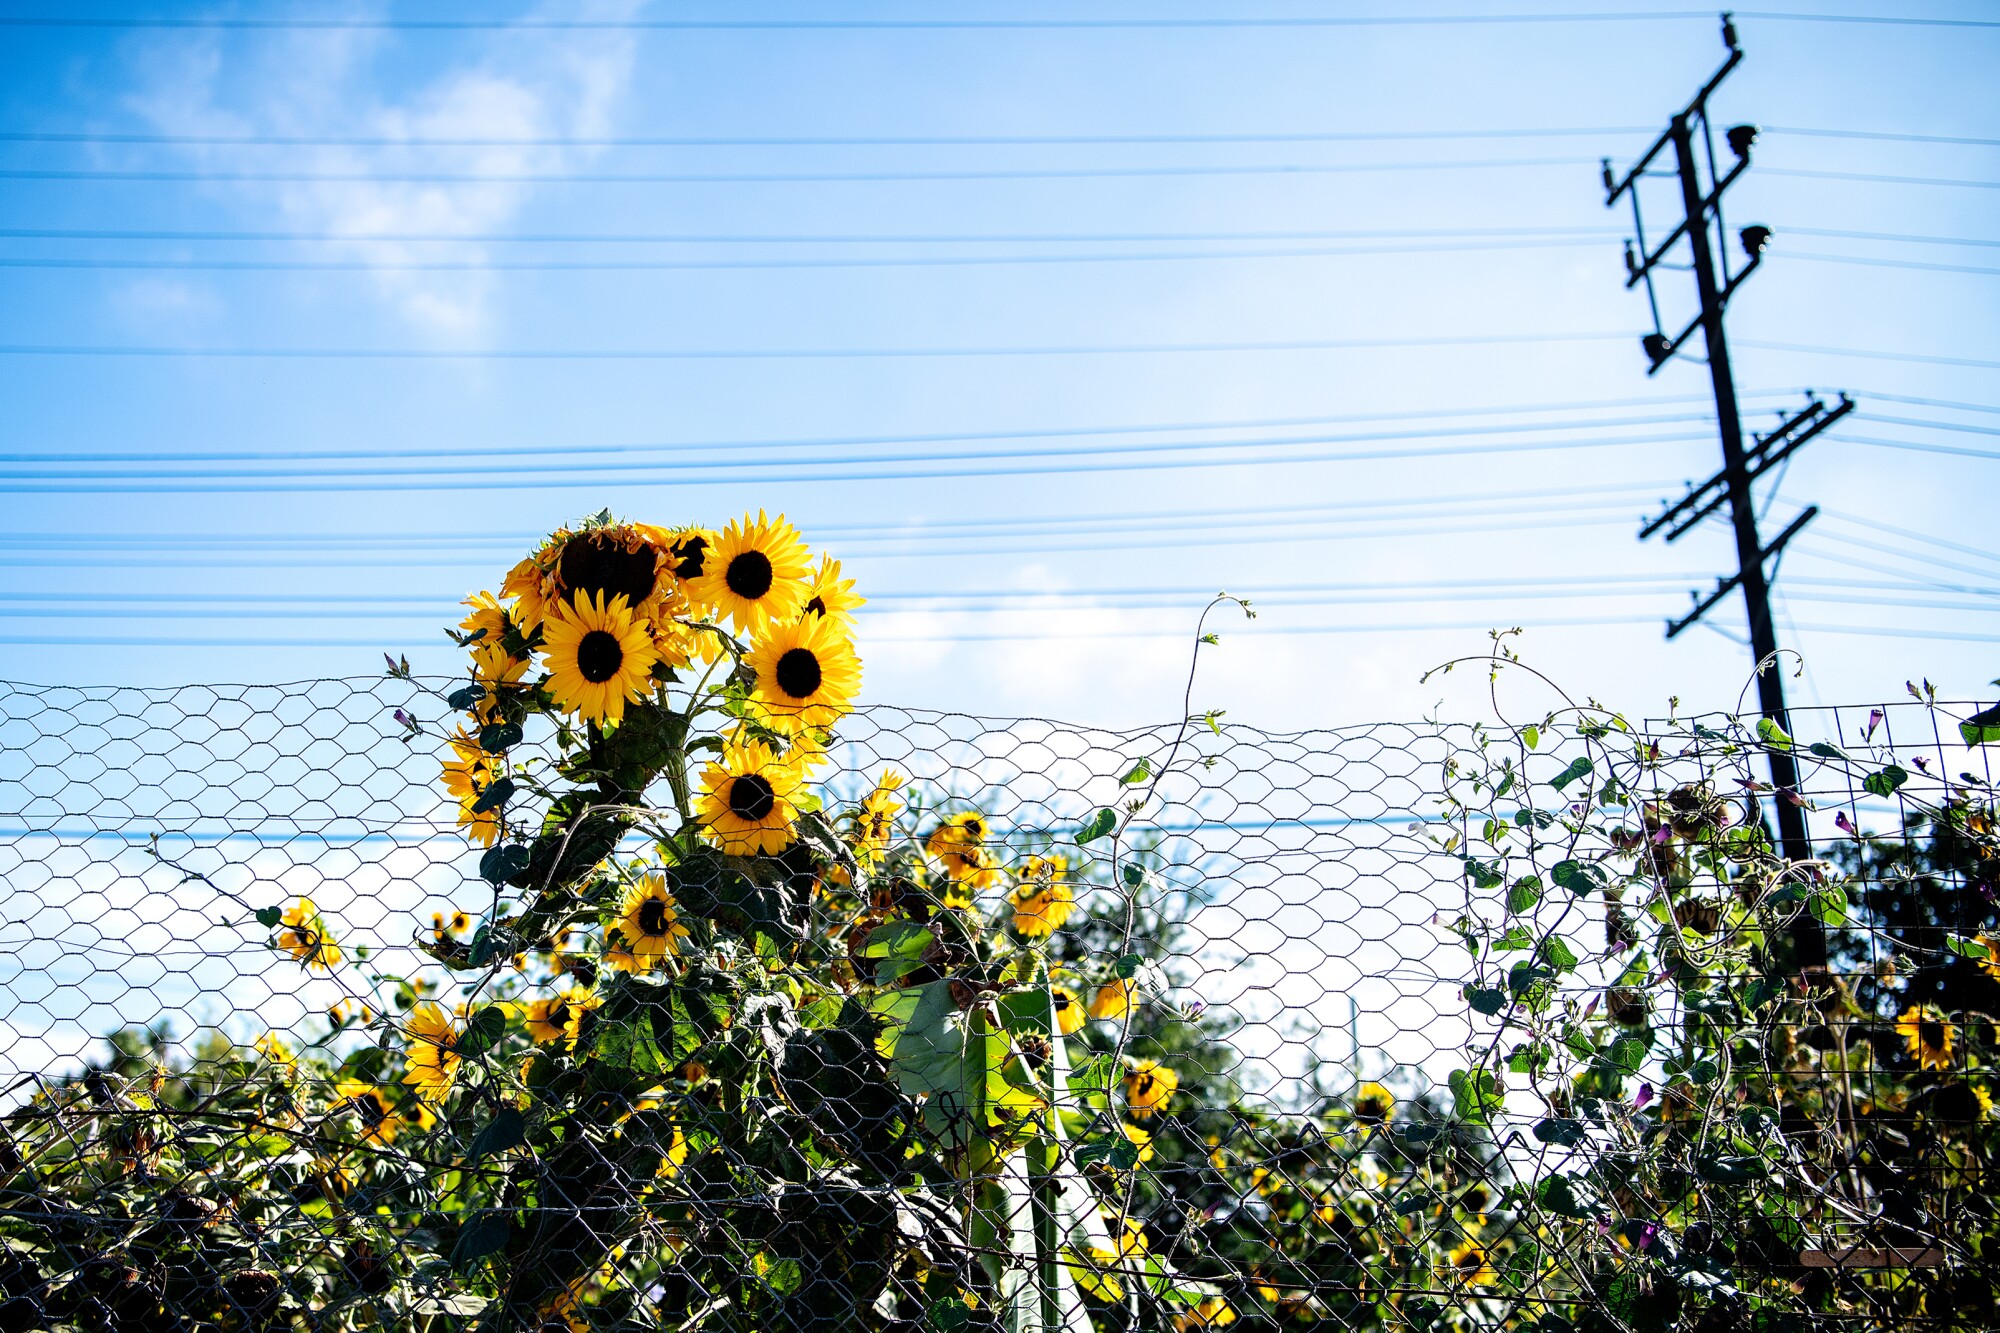 Sunflowers and vines form a metal fence.